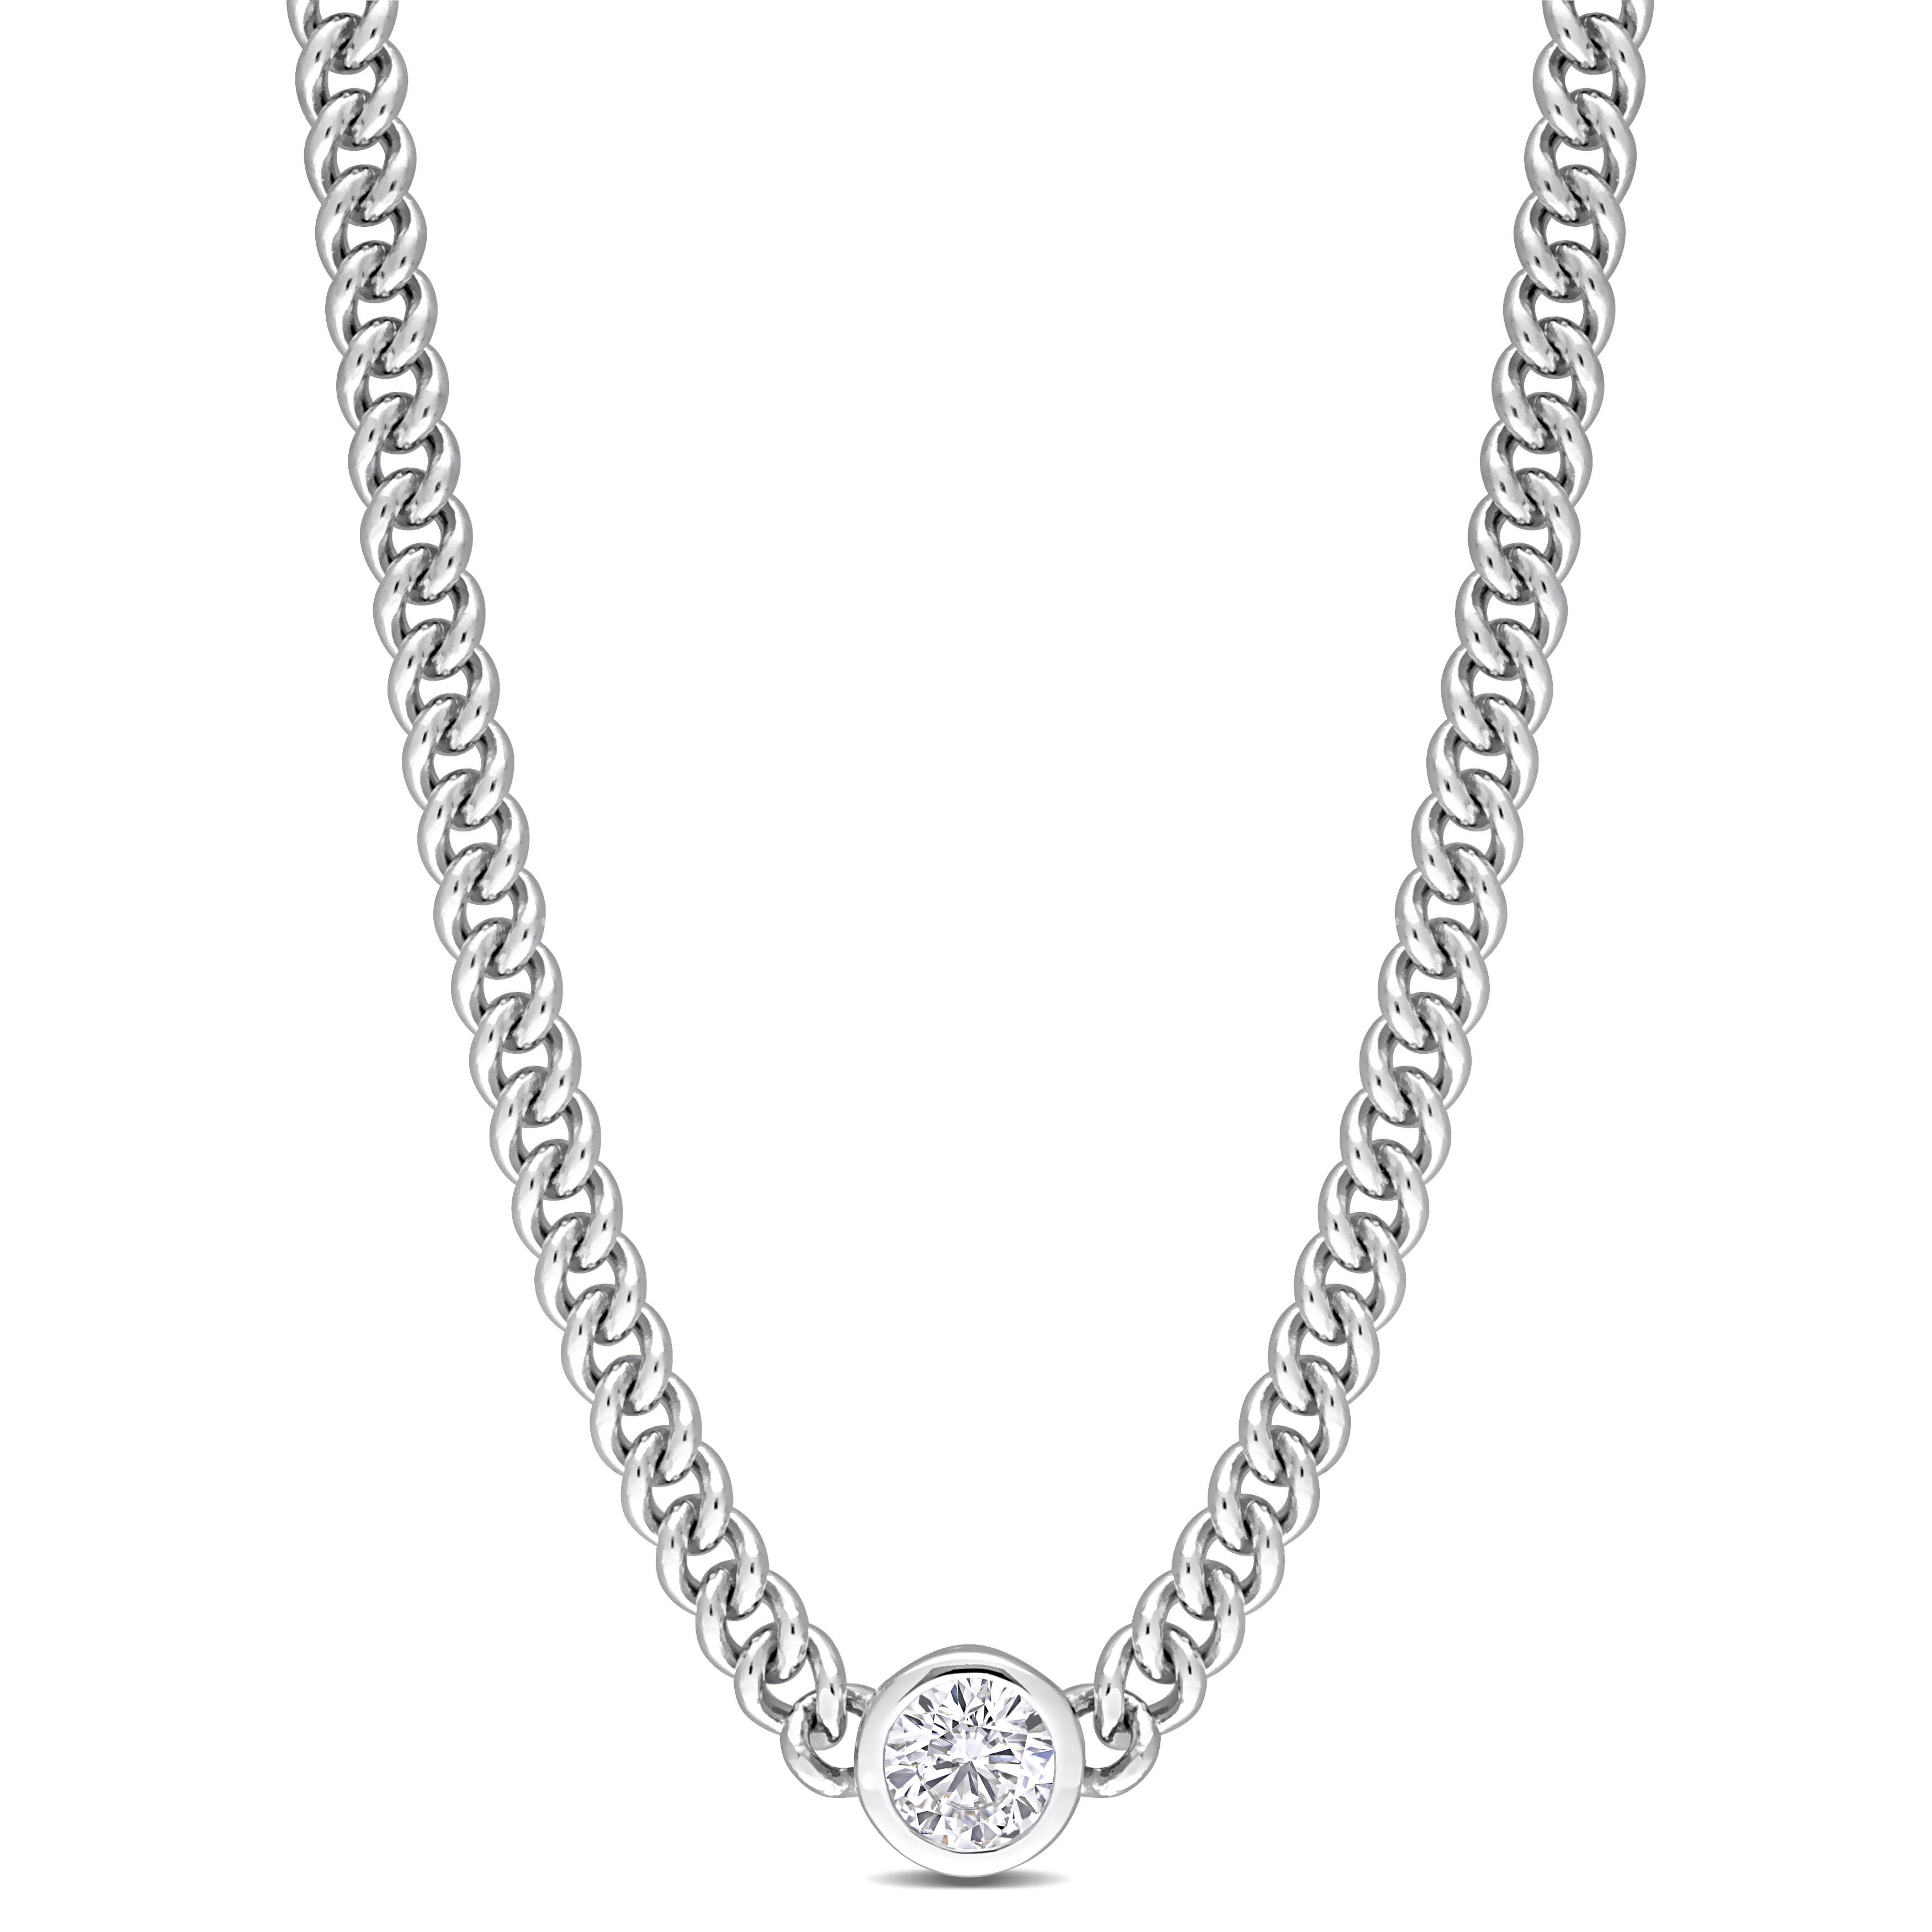 1 5/8 CT TGW Created White Sapphire Necklace in Sterling Silver - 16 in.